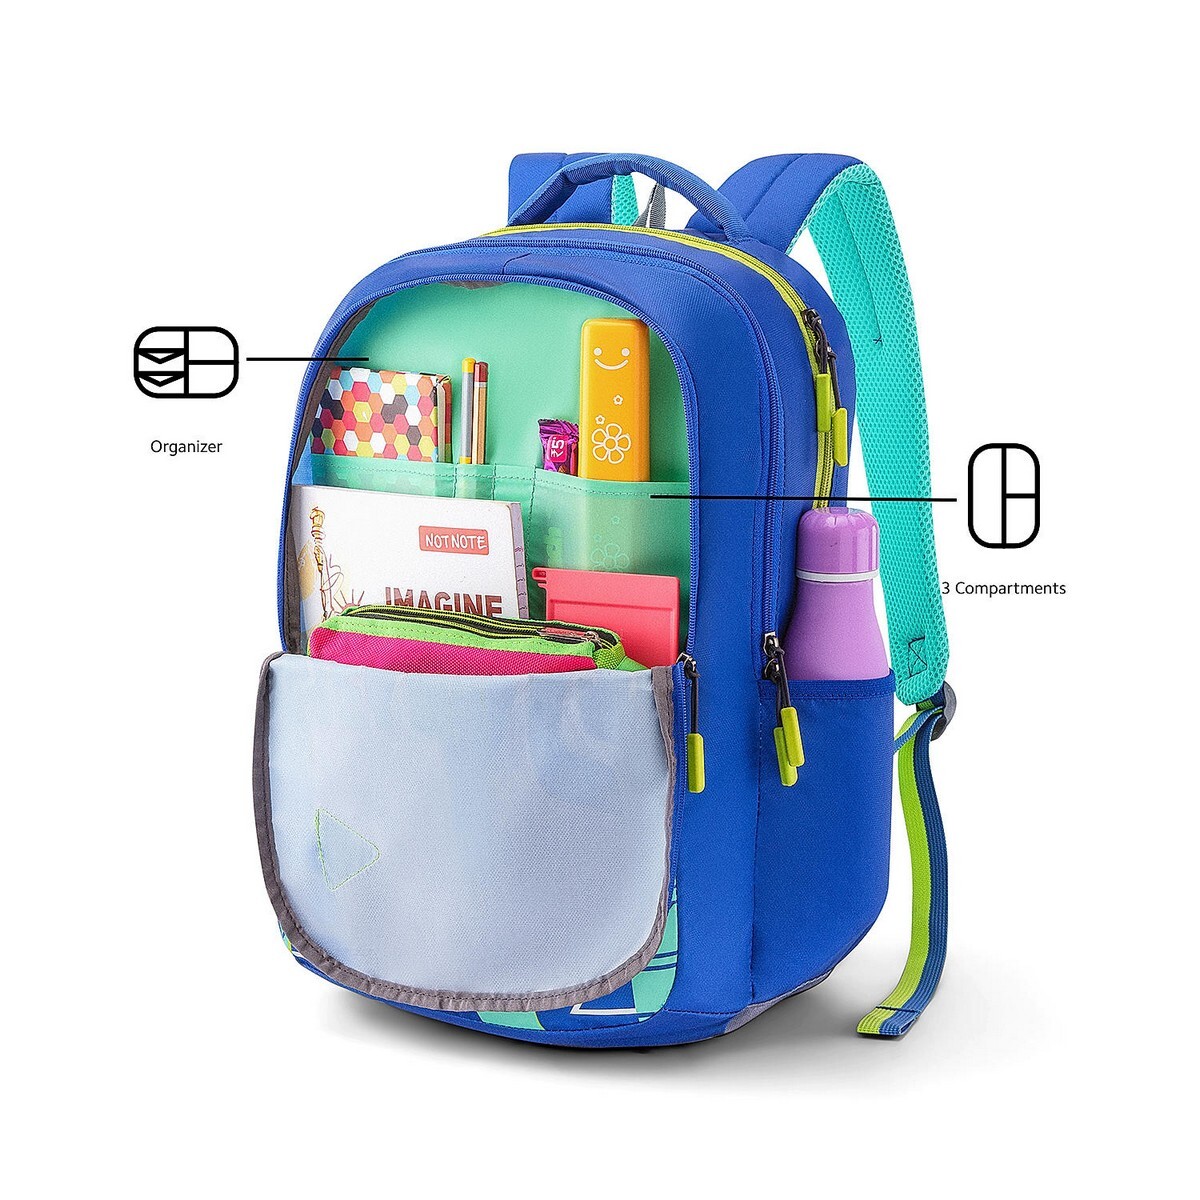 American Tourister Backpack Quad+ Bp01 Blue